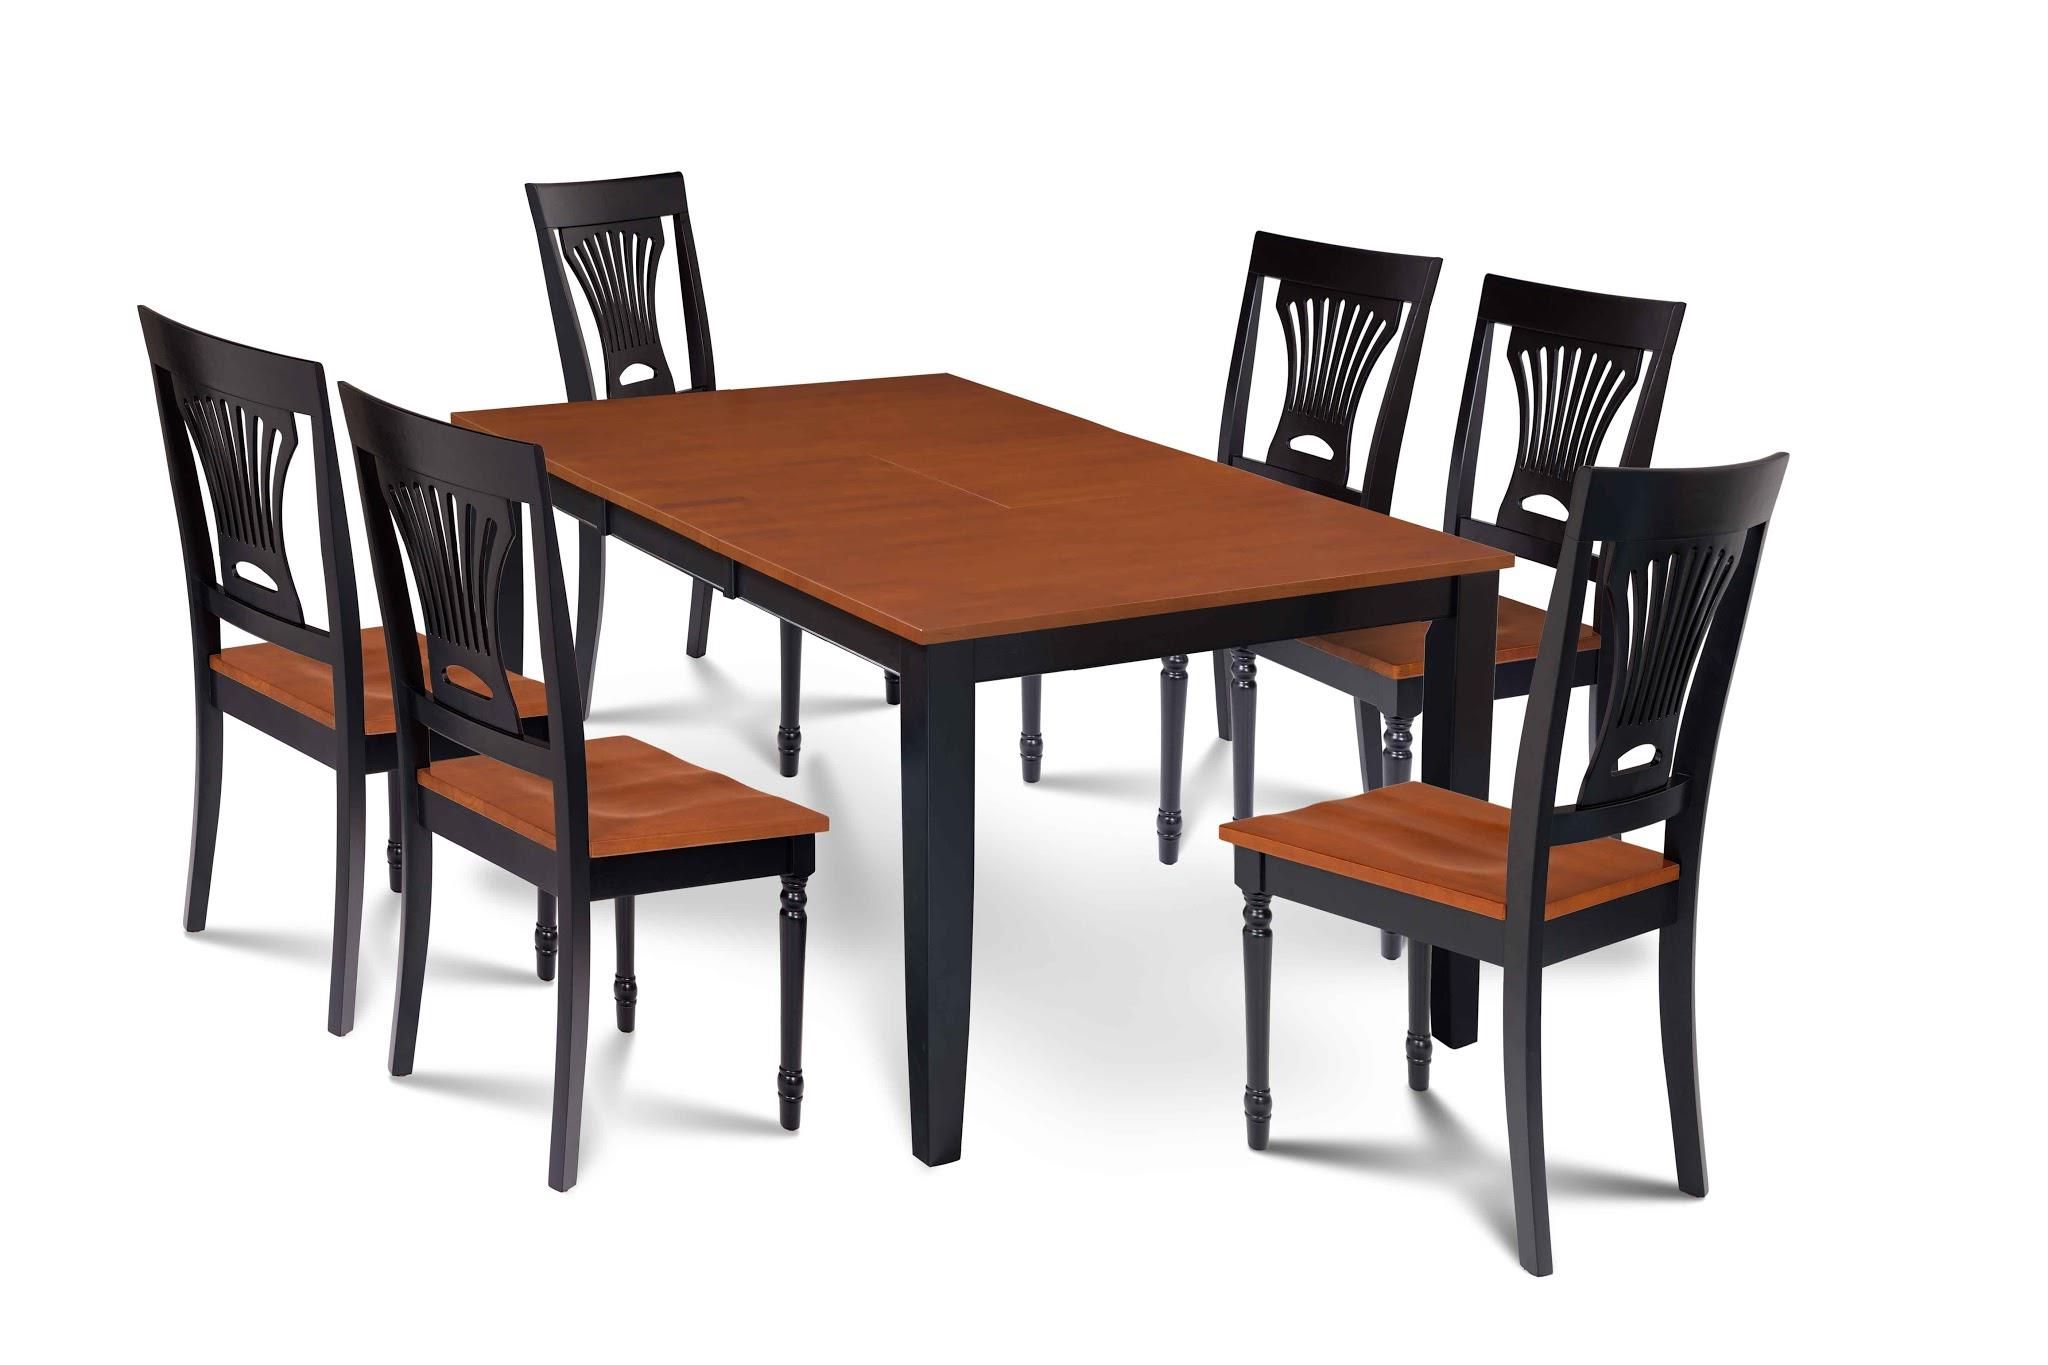 7 Piece Dining Room Set Table With A Butterfly Leaf And 6 Dining Chairs Throughout 2020 Black Medium Rectangle Patio Dining Sets (View 11 of 15)